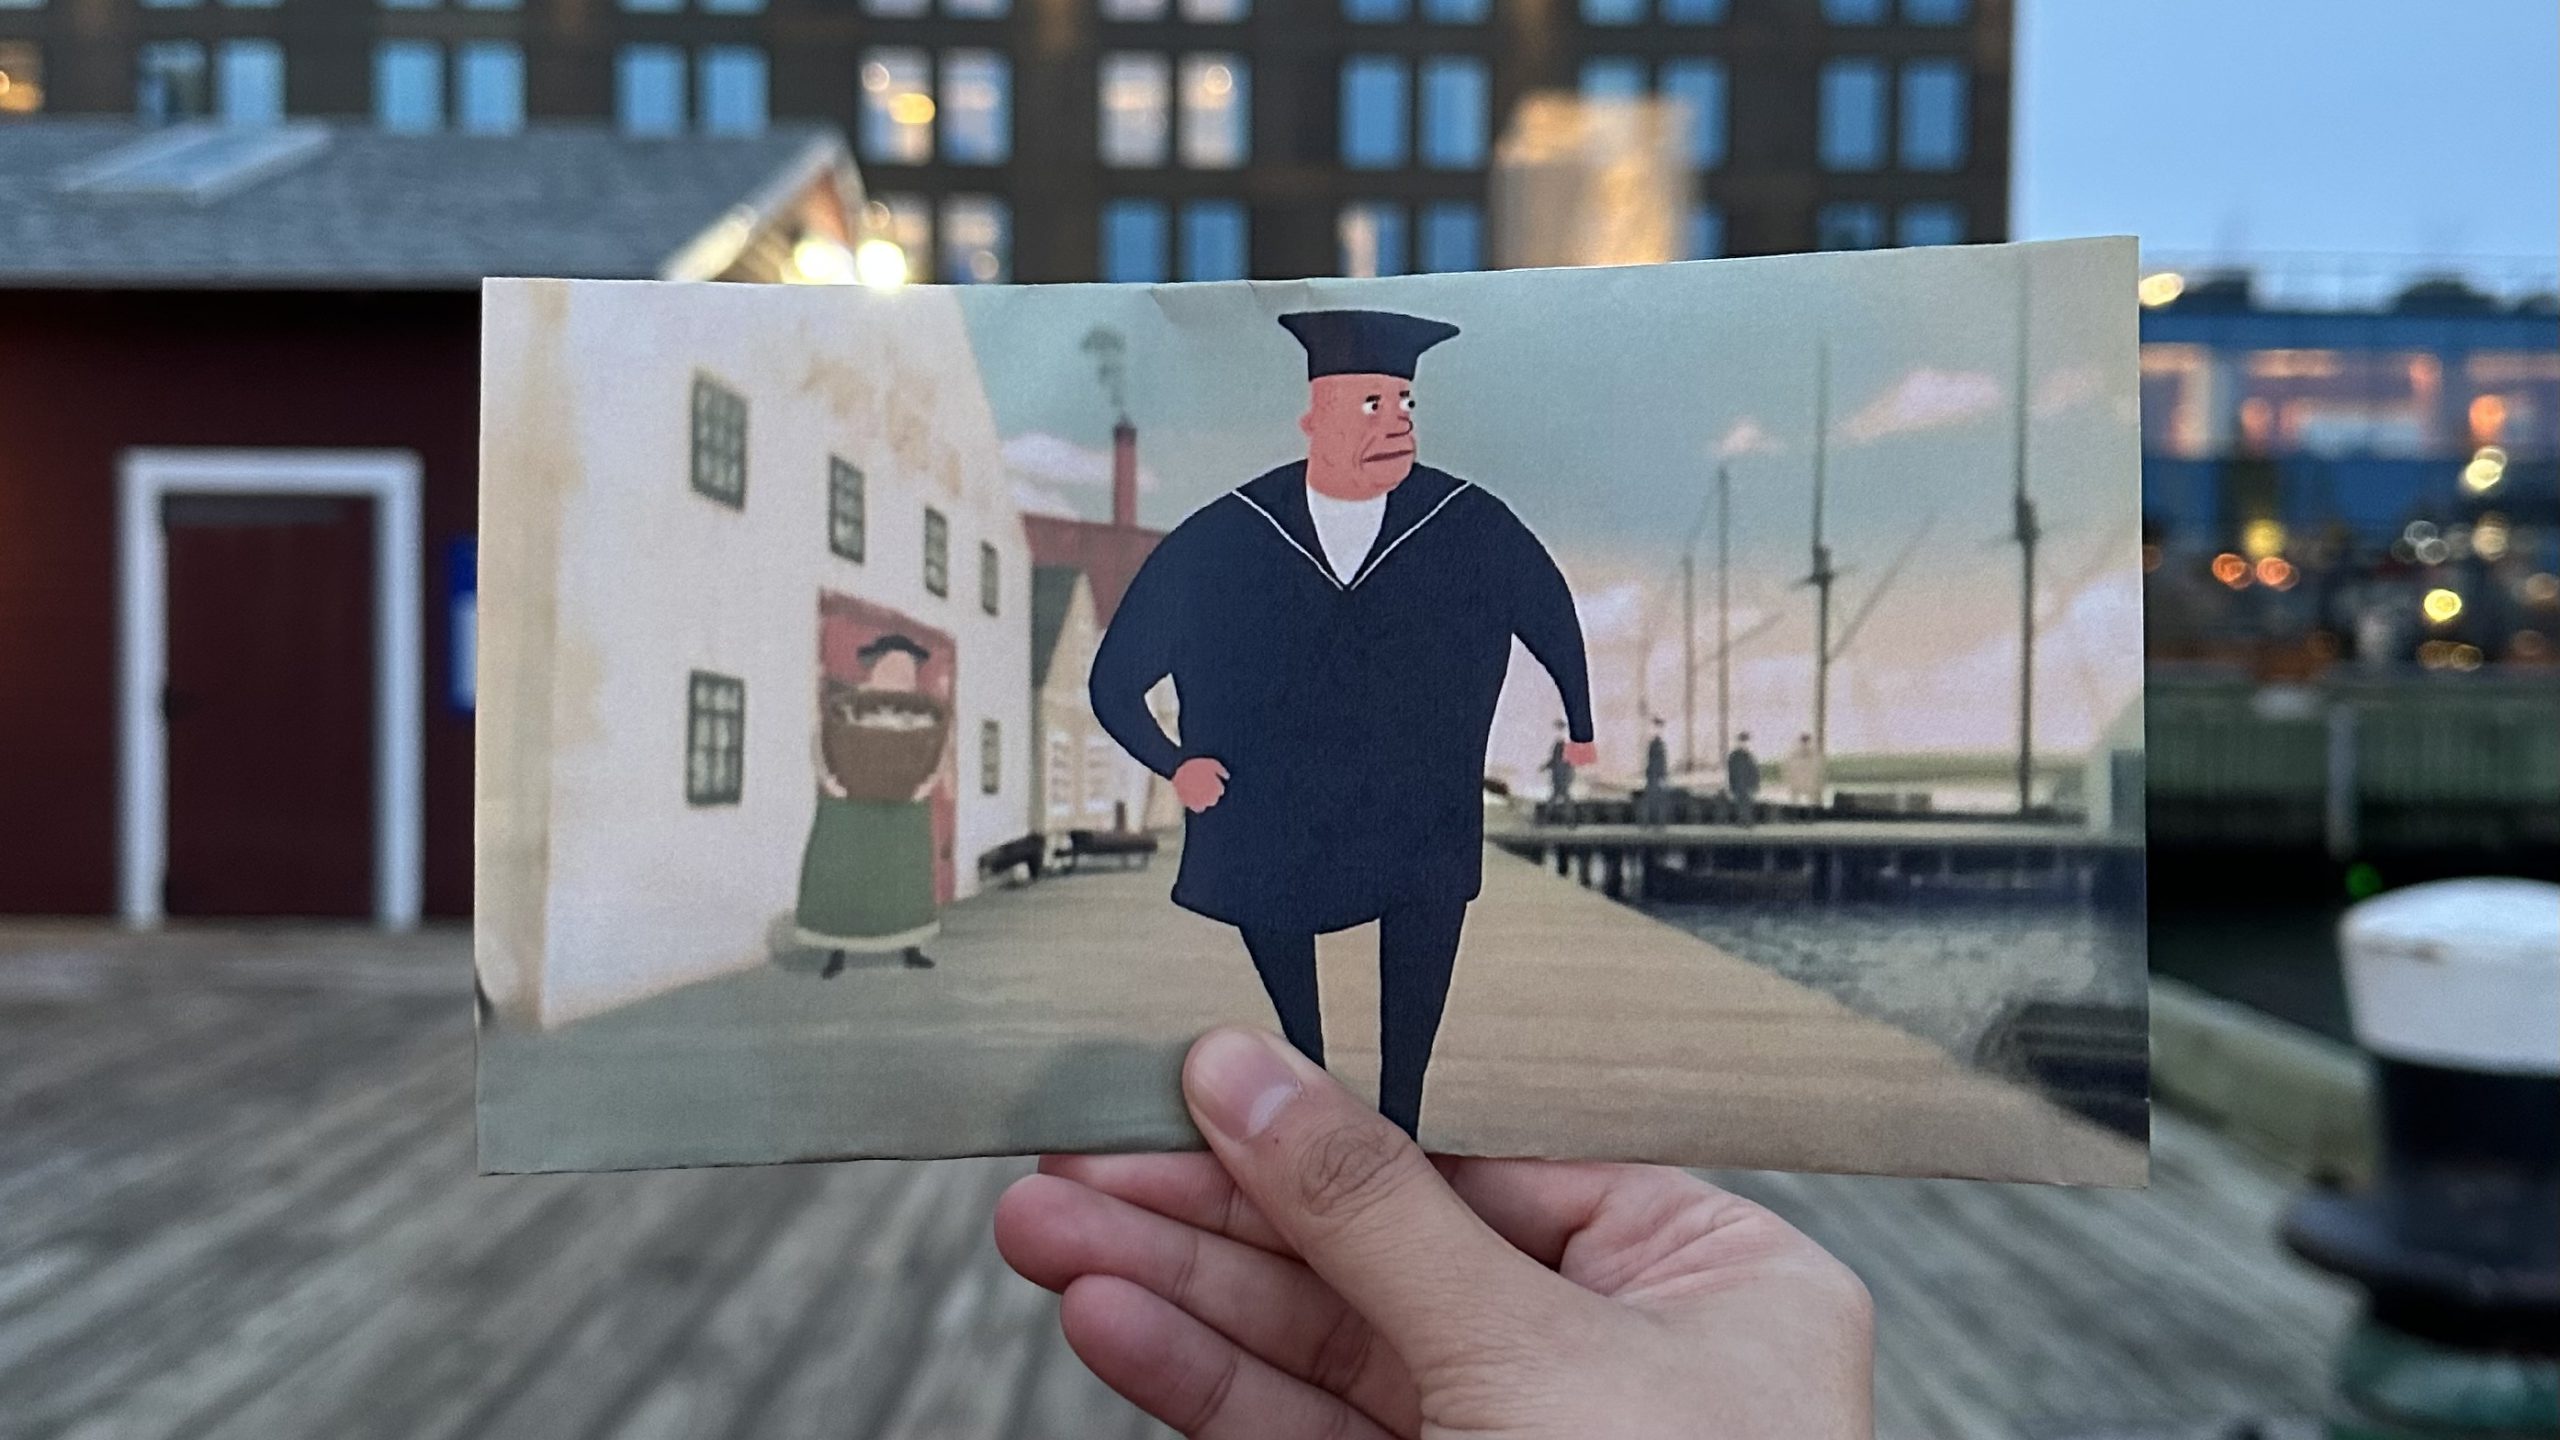 A printed still shot from The Flying Sailor, of a blue-suited sailor walking toward the viewer down the Halifax pier, held up by a hand in front of the real-life modern day pier, with the buildings and docks in the print lined up with the real-life surroundings so it appears to be one image.